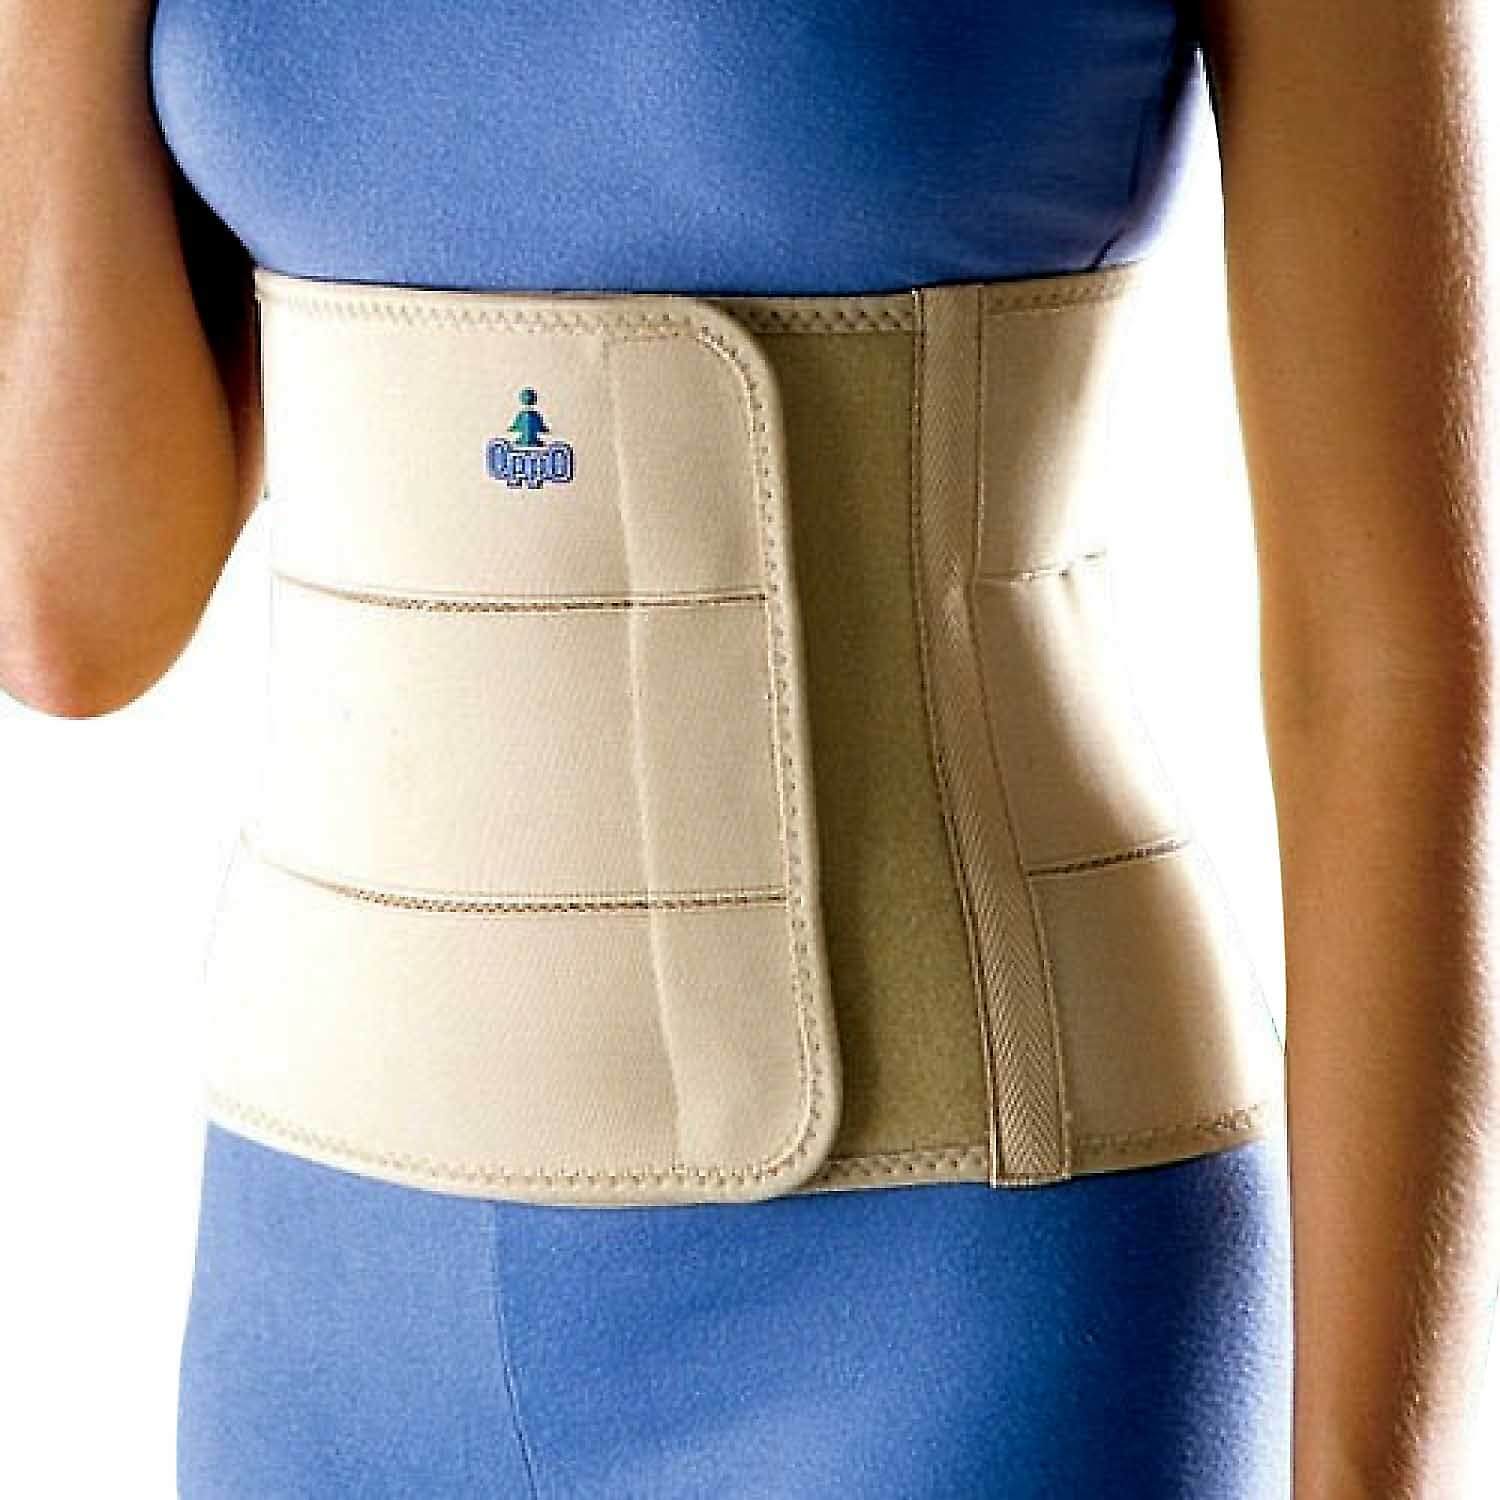 The Abdominal Binder (Elastic) 2060 by Oppo Medical is always shipped in its original packaging.